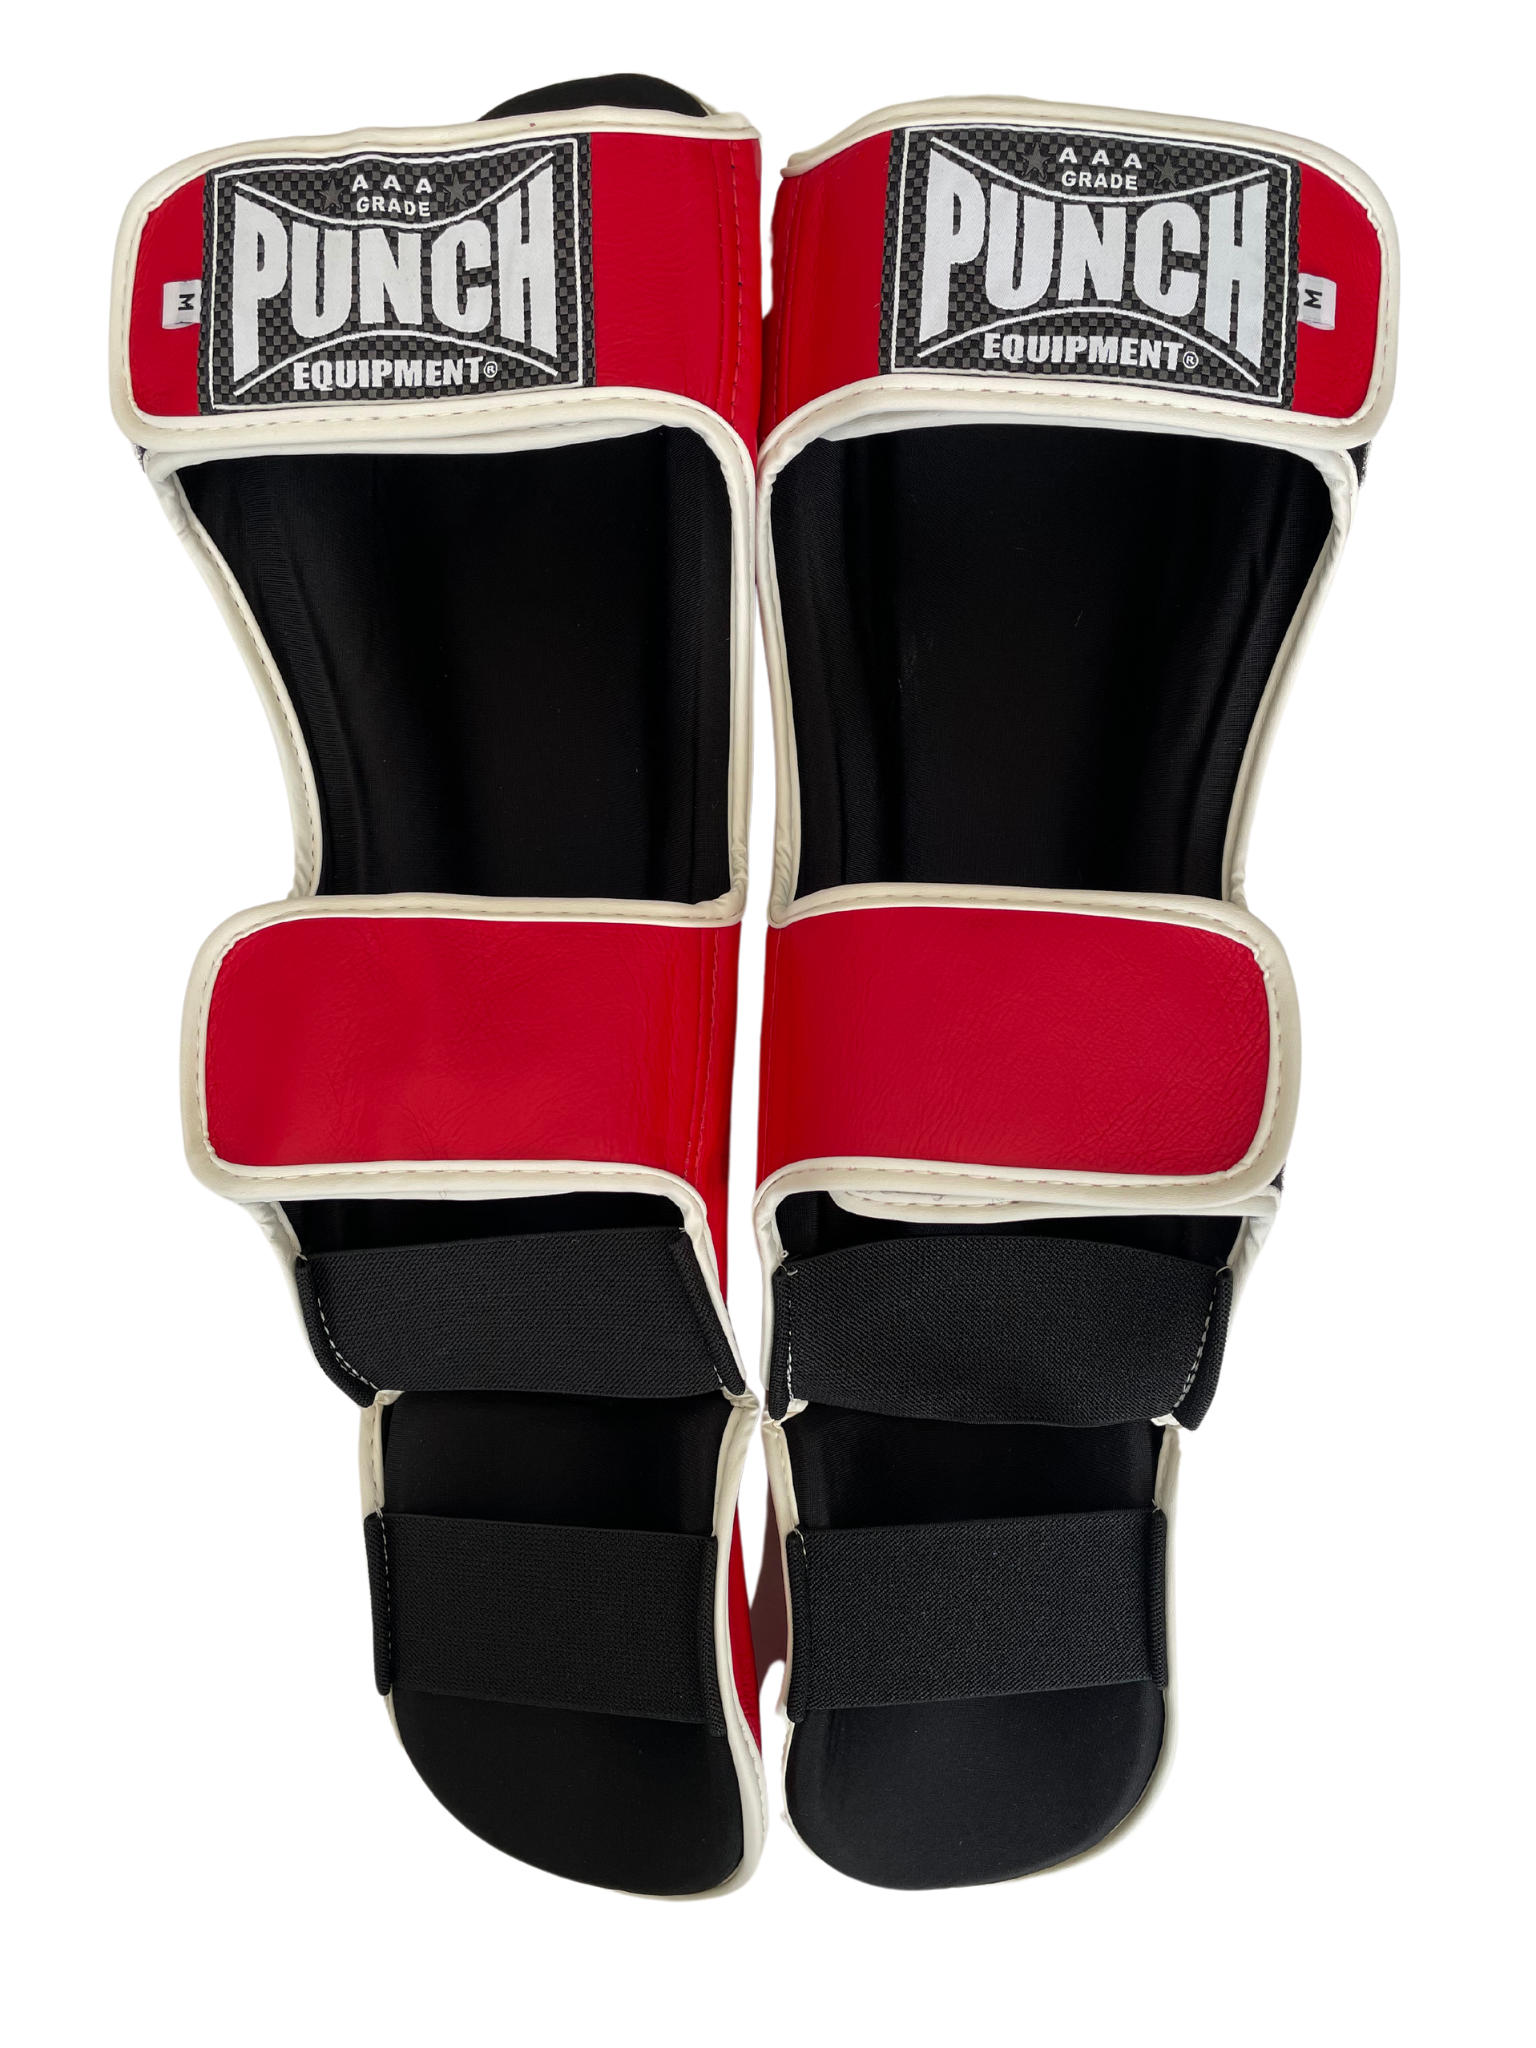 SHIN PADS - Siam™ - LEATHER - RED